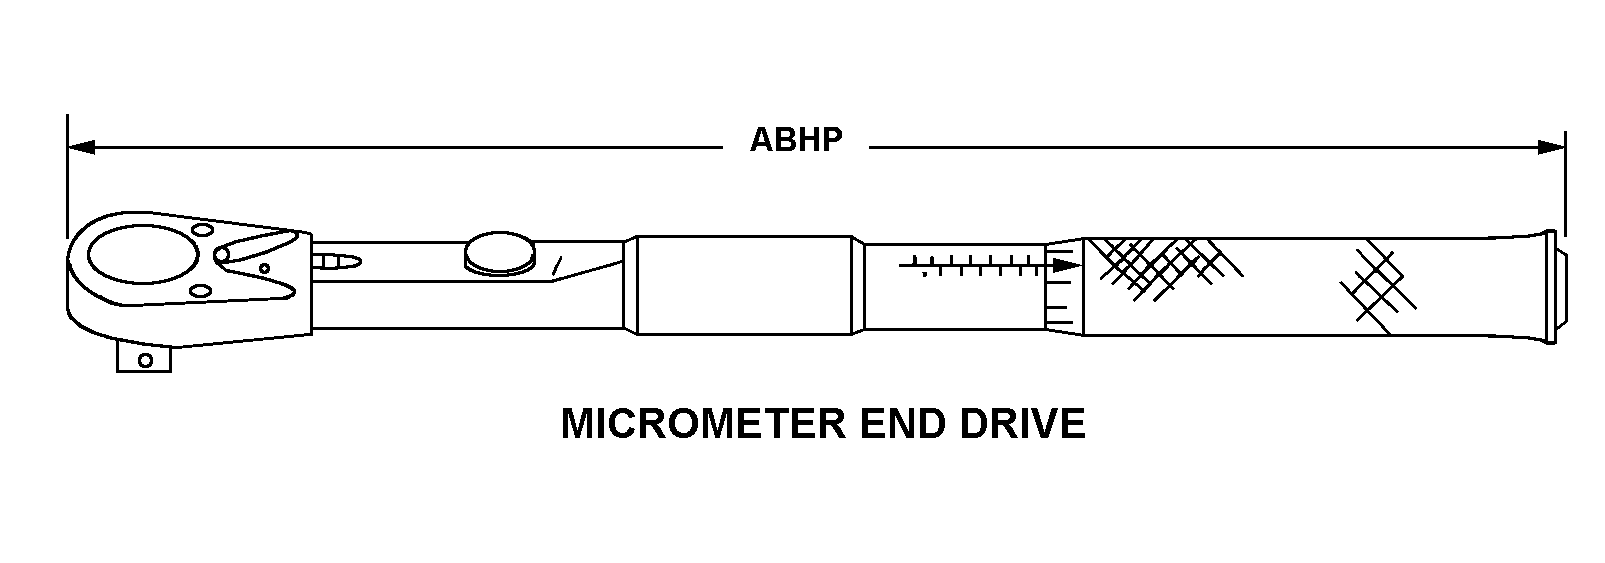 MICROMETER END DRIVE style nsn 5120-01-426-7586